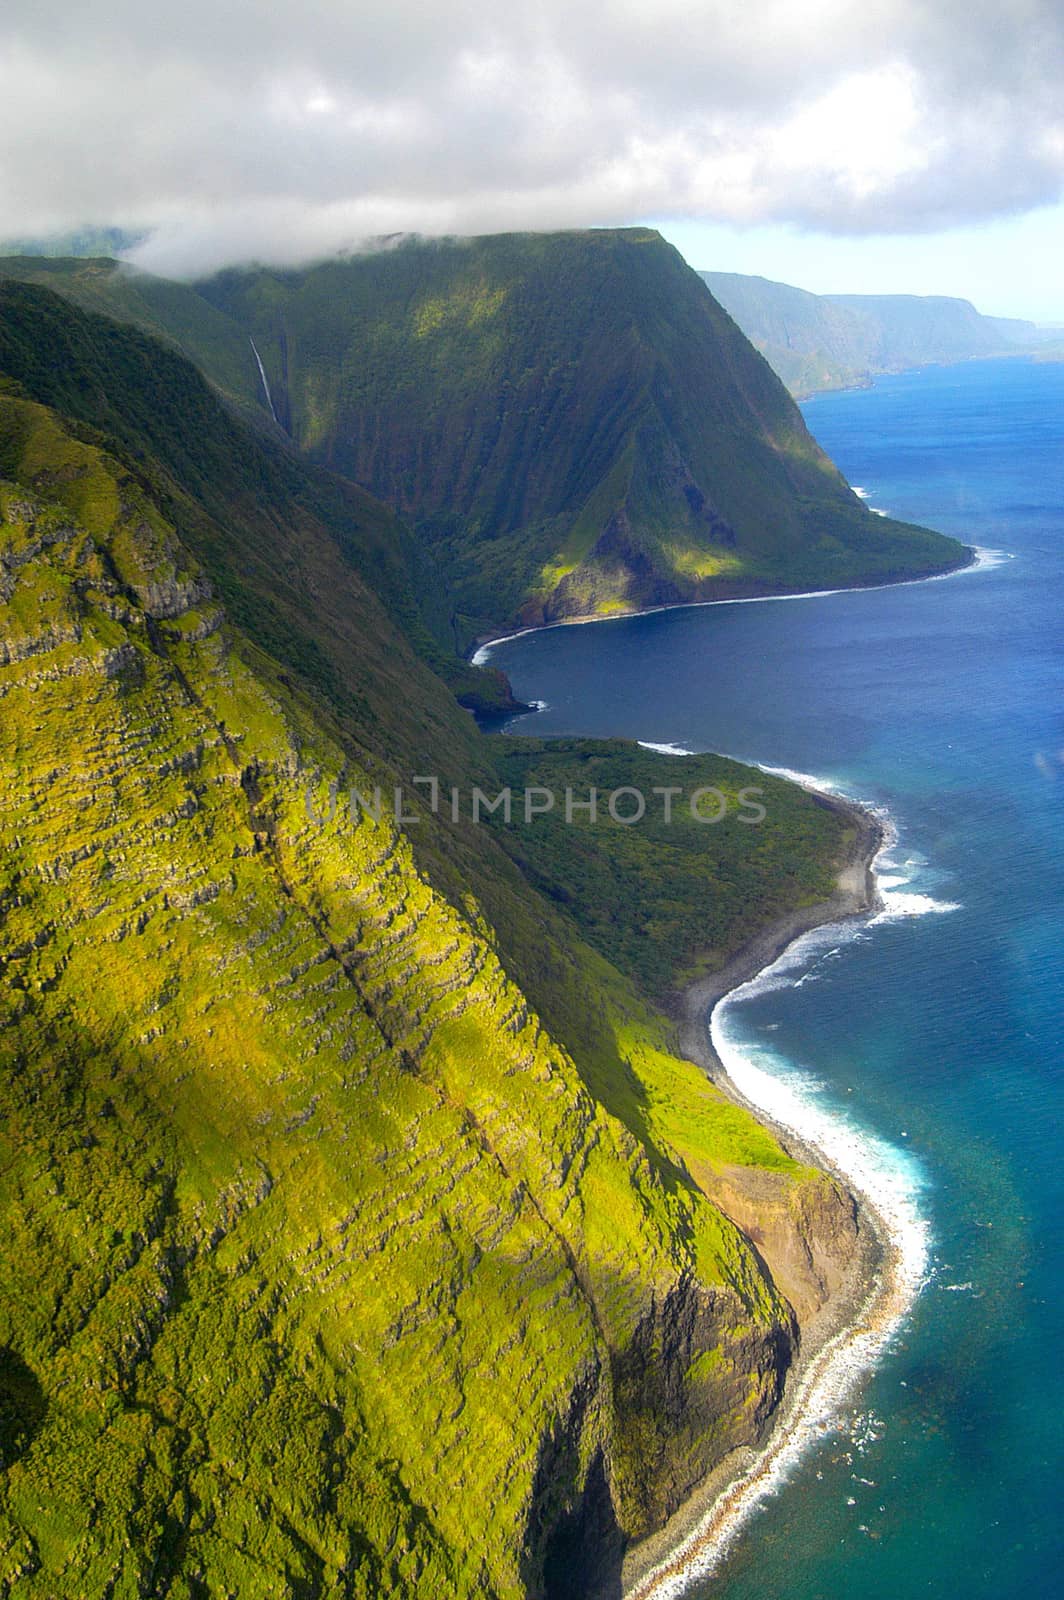 Scene from Helicopter over Maui' rain forest